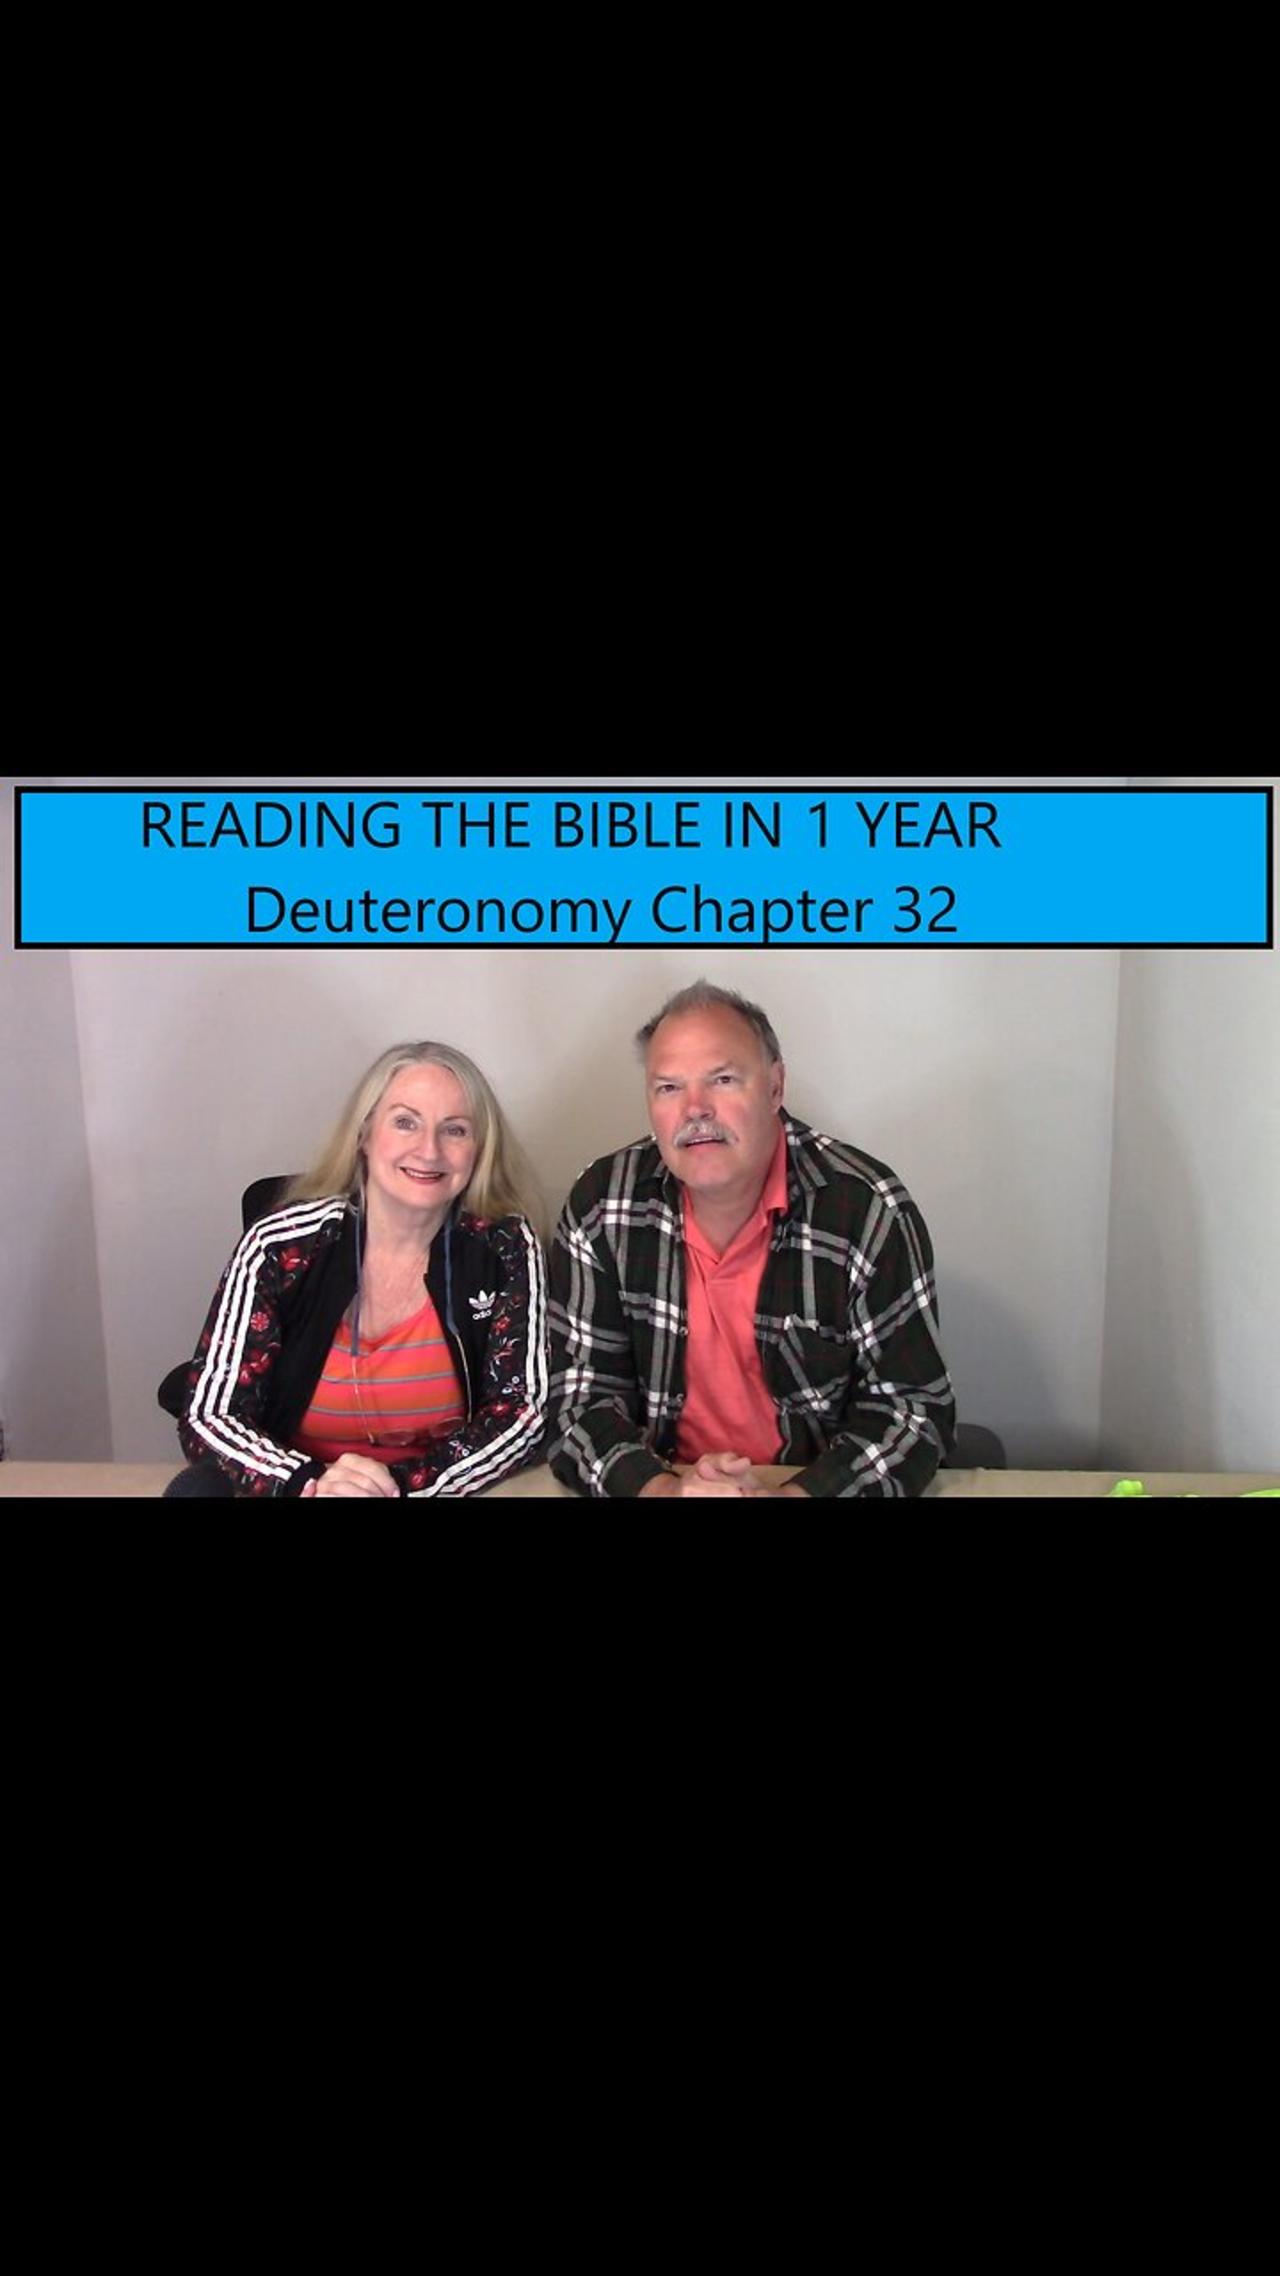 Reading the Bible in 1 Year - Deuteronomy Chapter 32